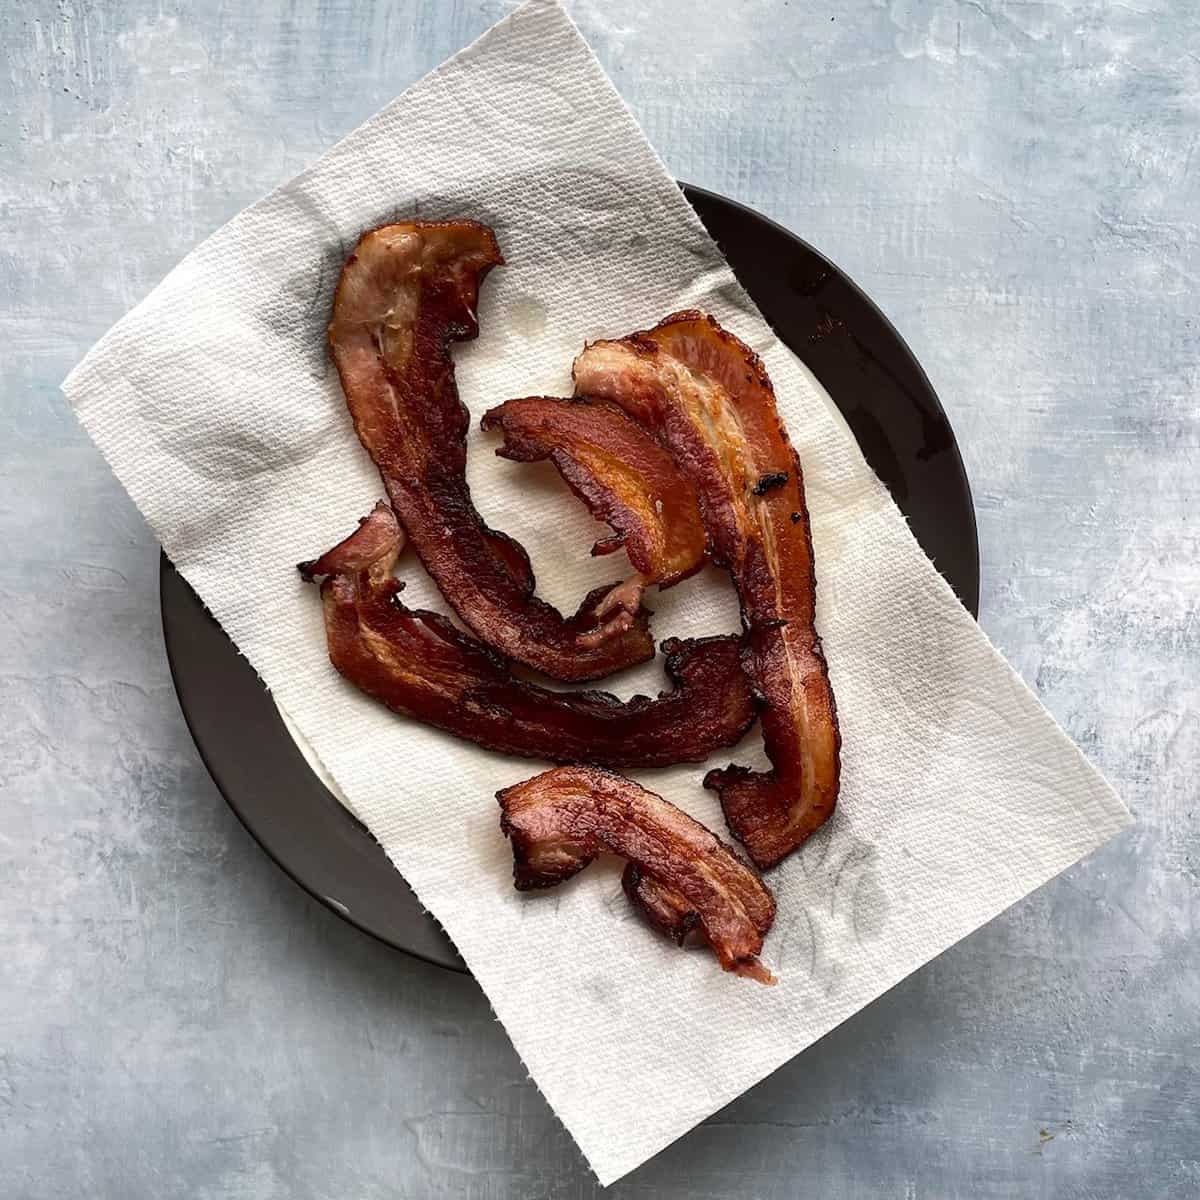 strips of bacon on a paper-towel lined plate.